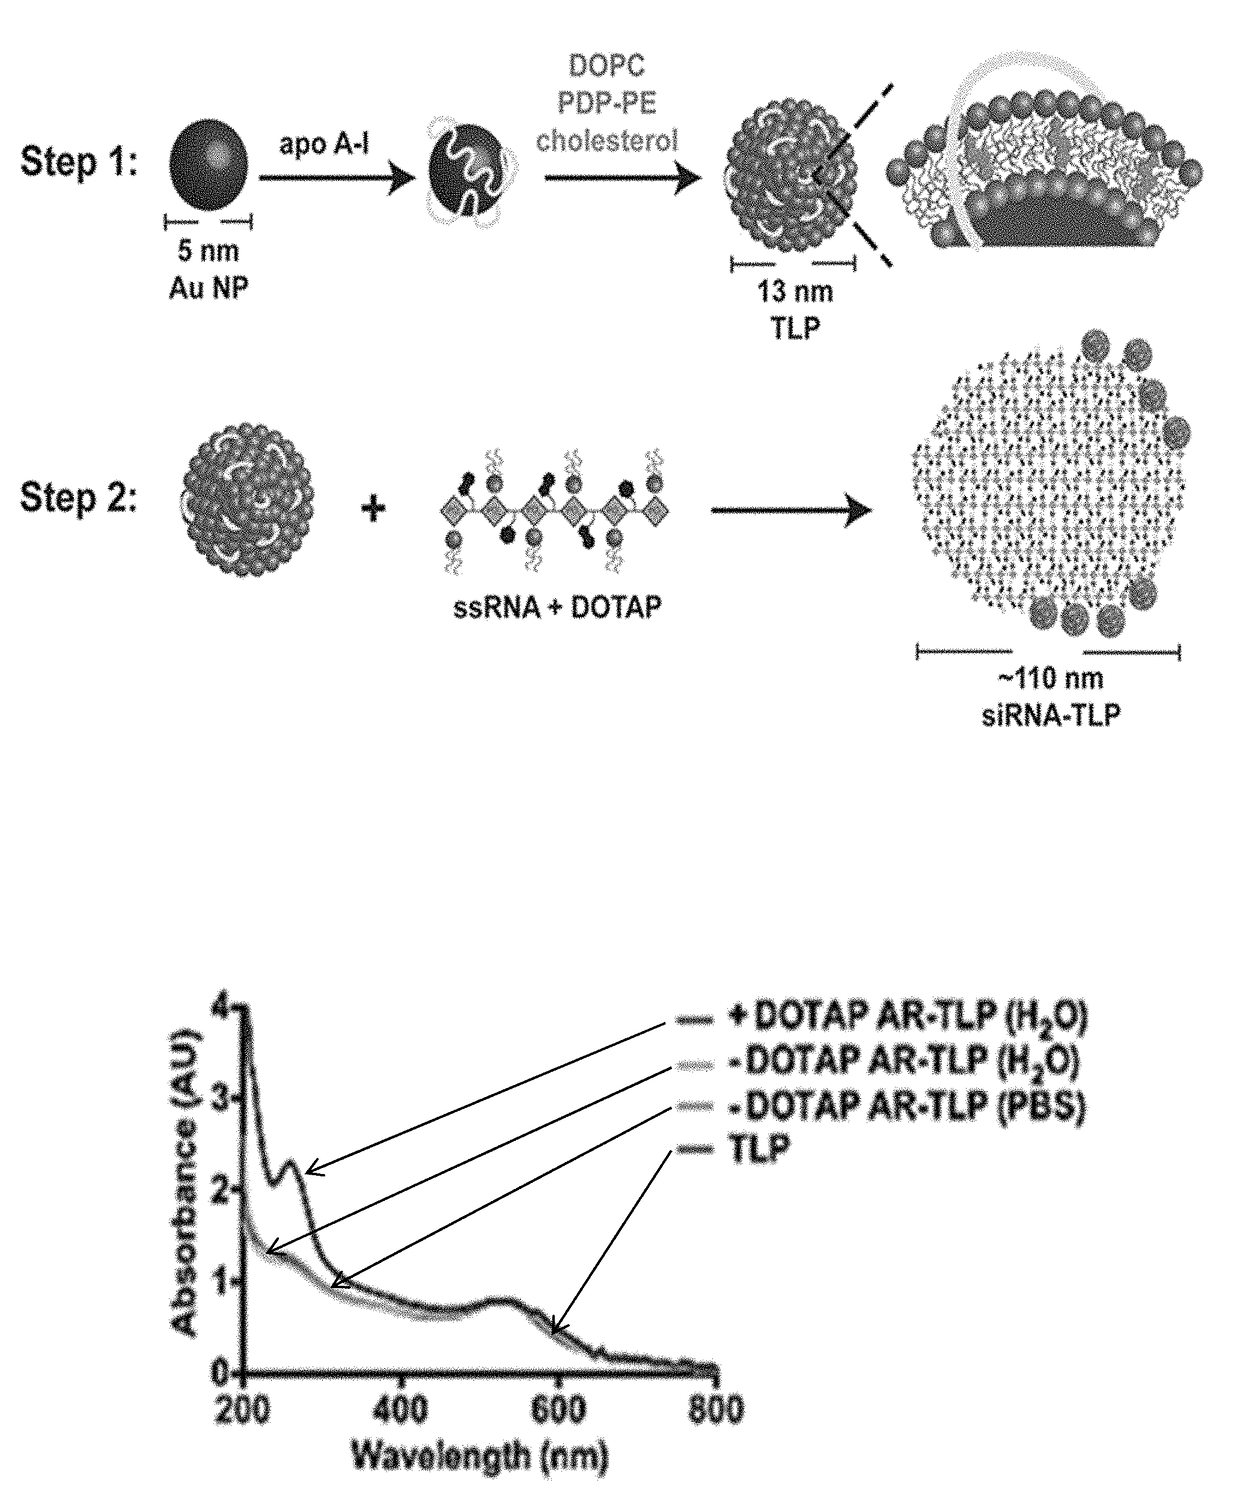 Short interfering RNA templated lipoprotein particles (sirna-tlp)